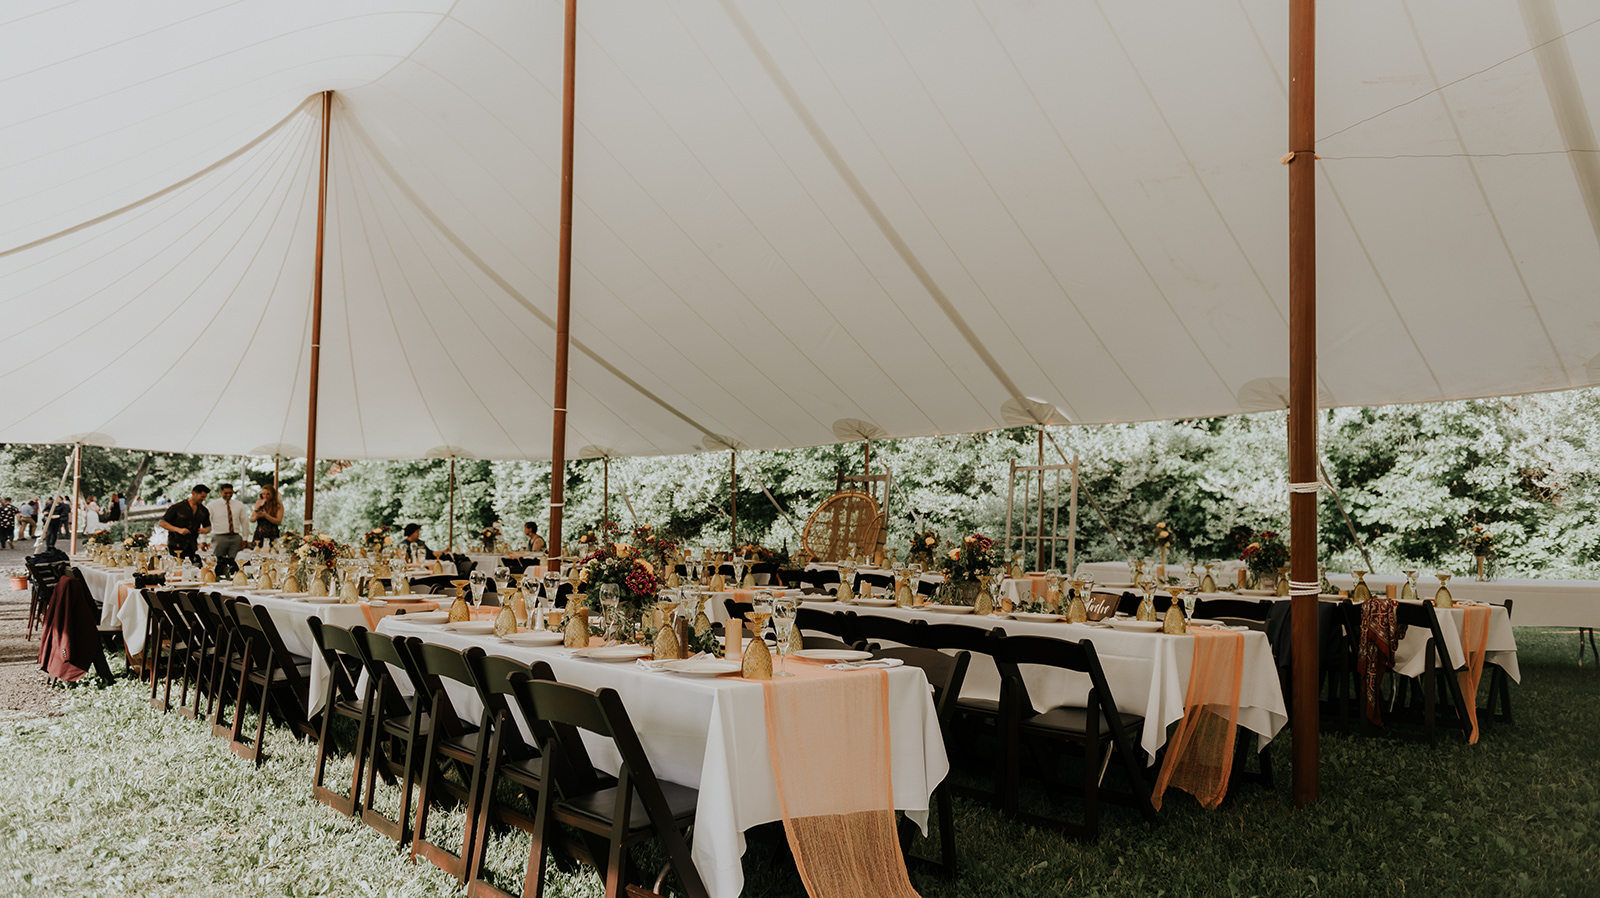 Wedding reception for an outdoor tented wedding in Massachusetts - Pearl Weddings & Events